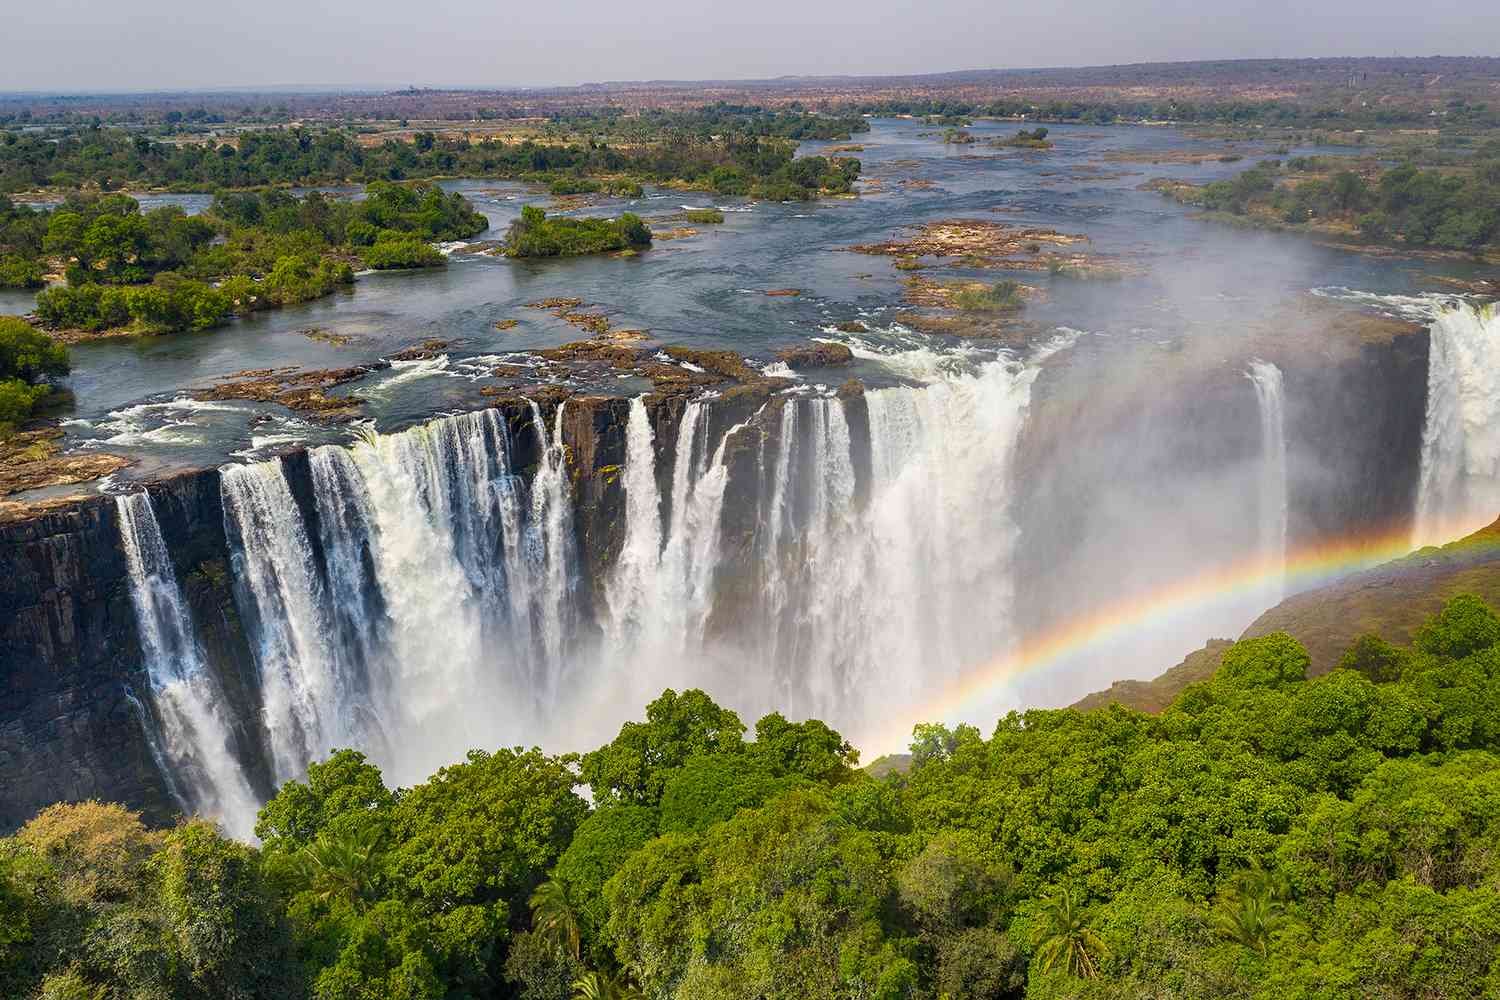 21 Most Beautiful Waterfalls in the World